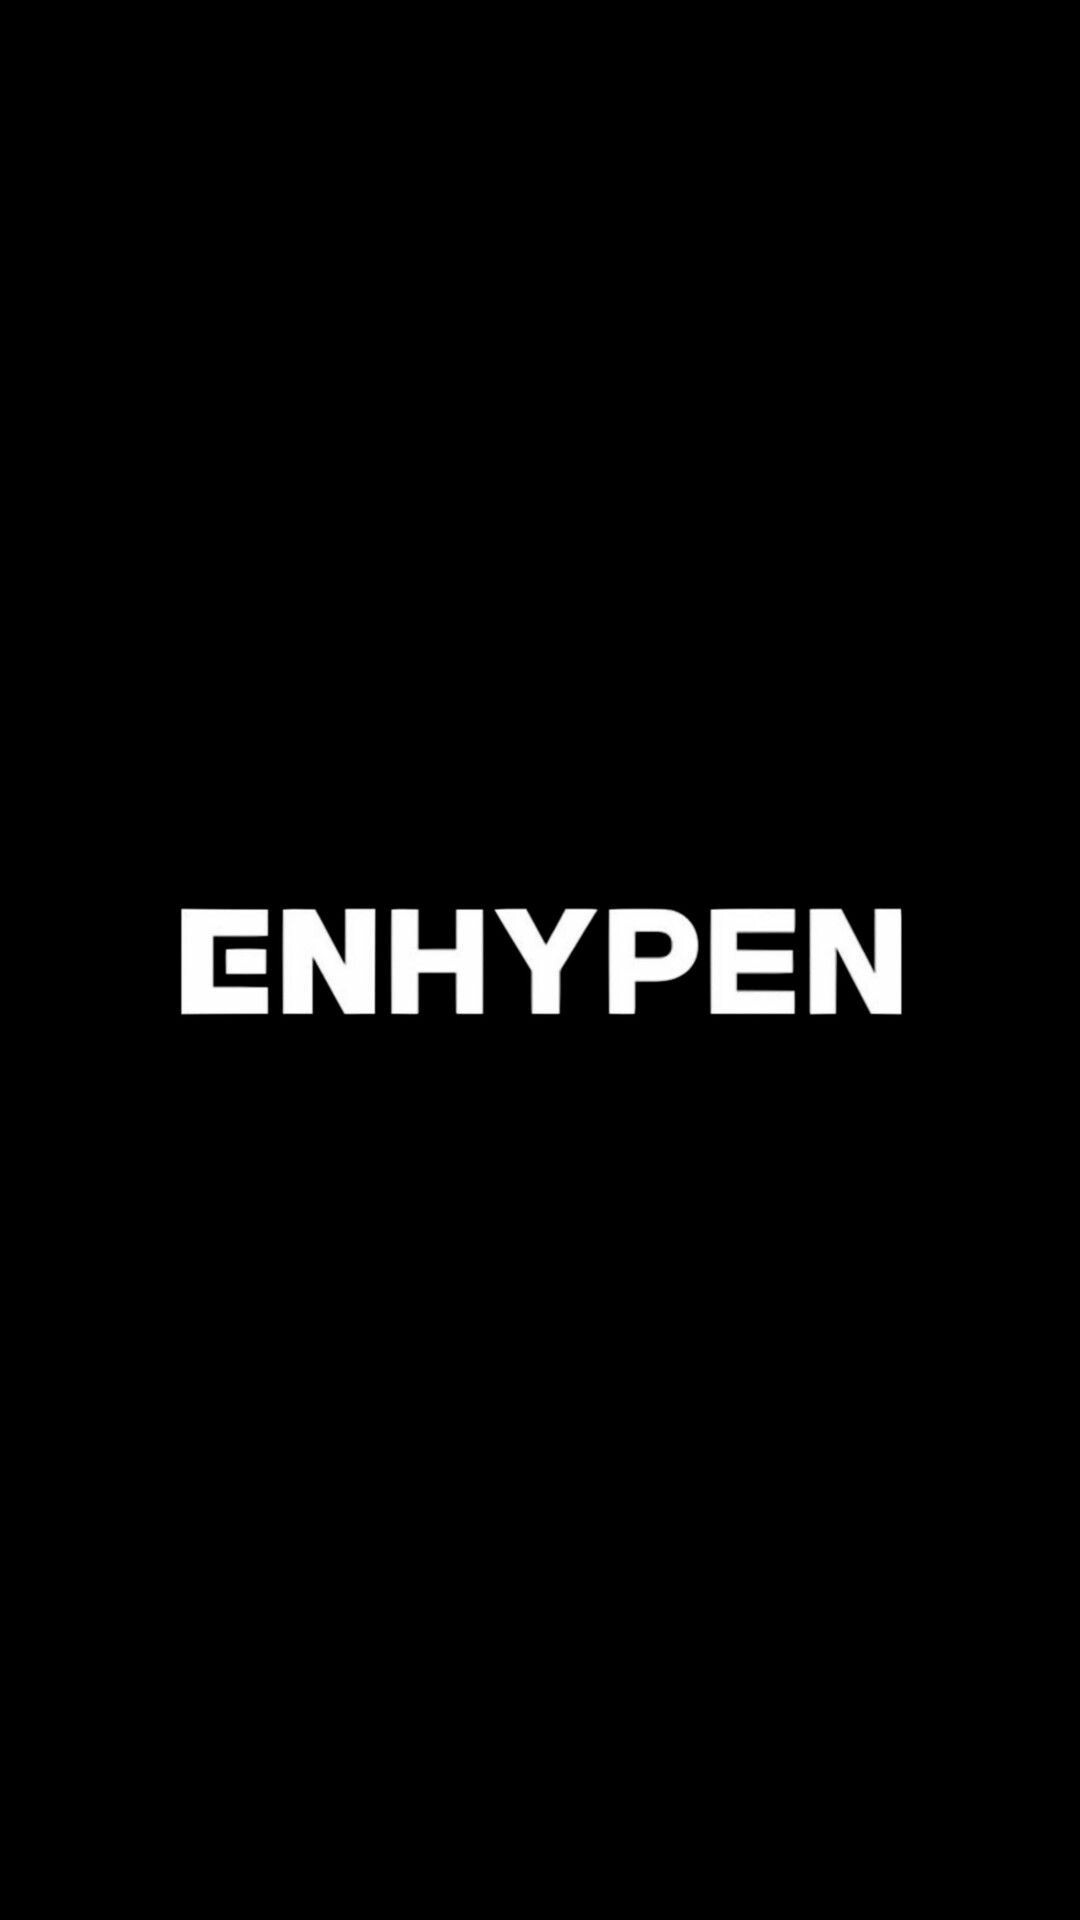 ENHYPEN: The fastest K-pop group to achieve two albums with million-selling records. 1080x1920 Full HD Wallpaper.